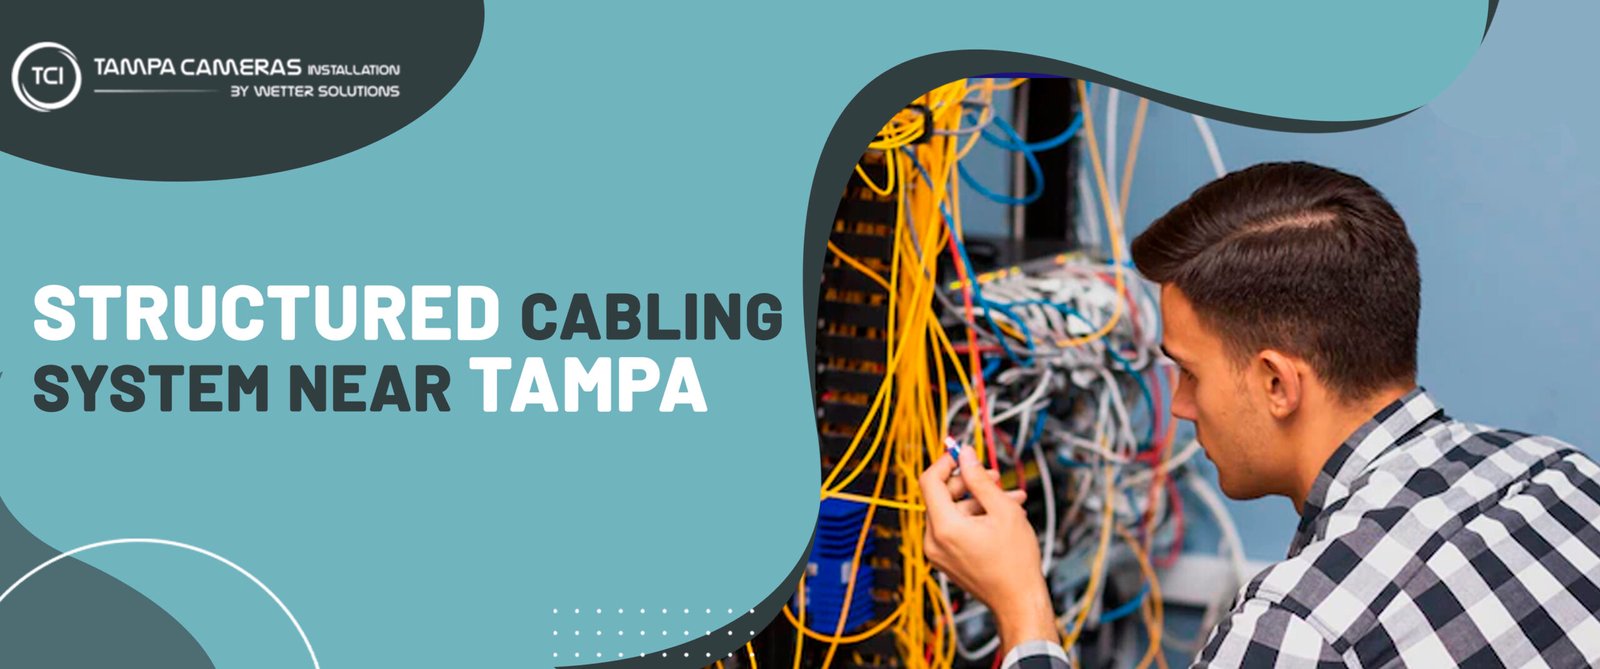 Structured cabling system near Tampa